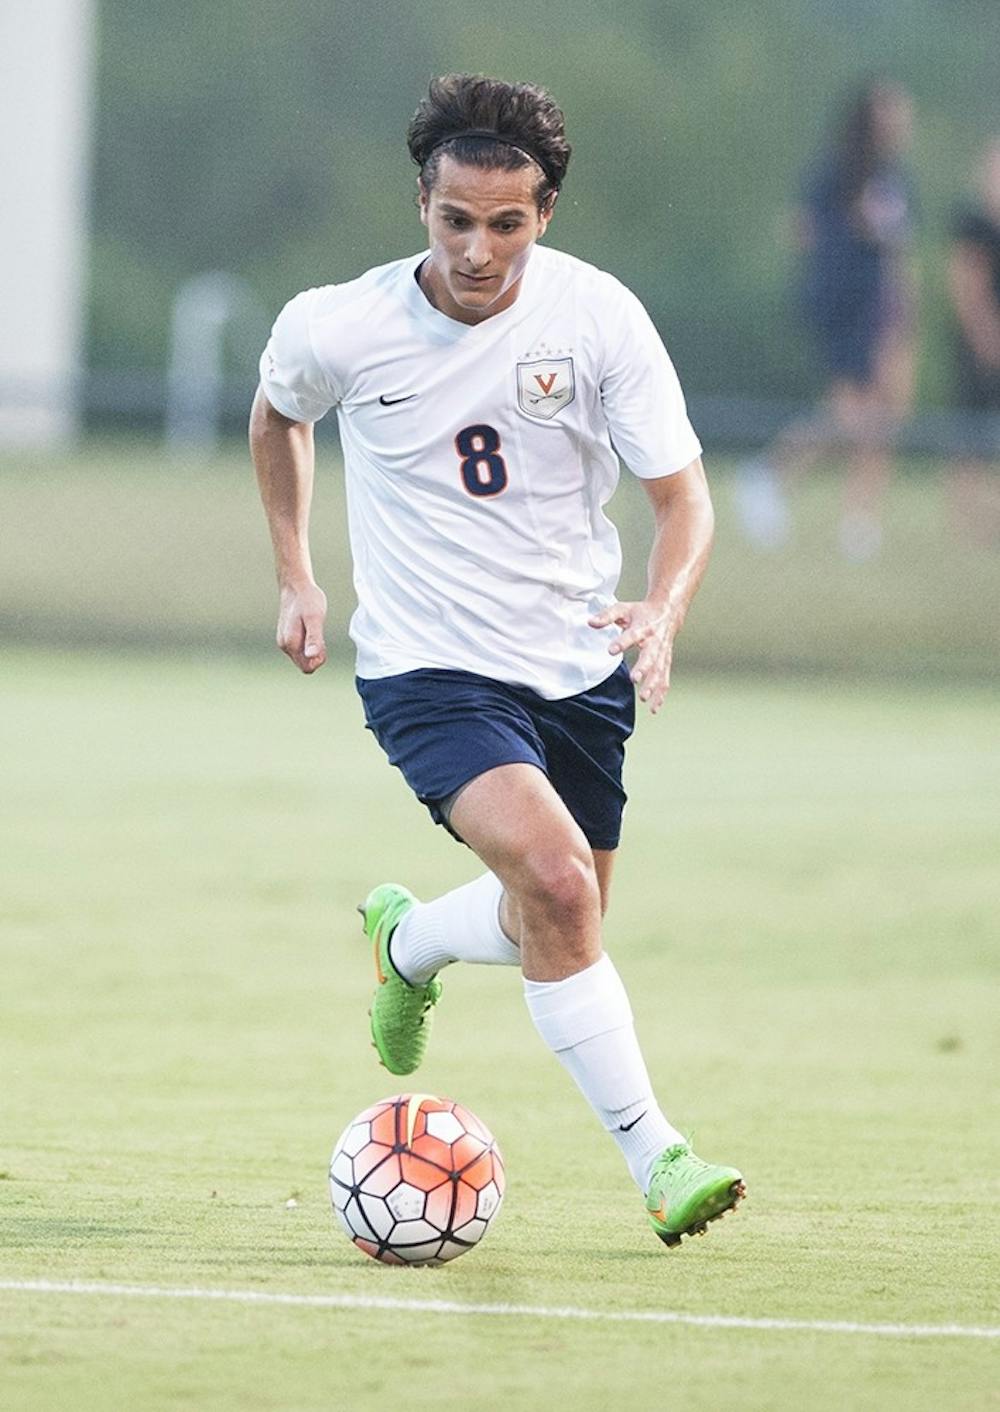 <p>Led by redshirt junior midfielder Pablo Aguilar, whose equalizer against UNC fueled the Cavaliers to their first ACC victory of the season, Virginia soccer will host Radford on Tuesday.&nbsp;</p>